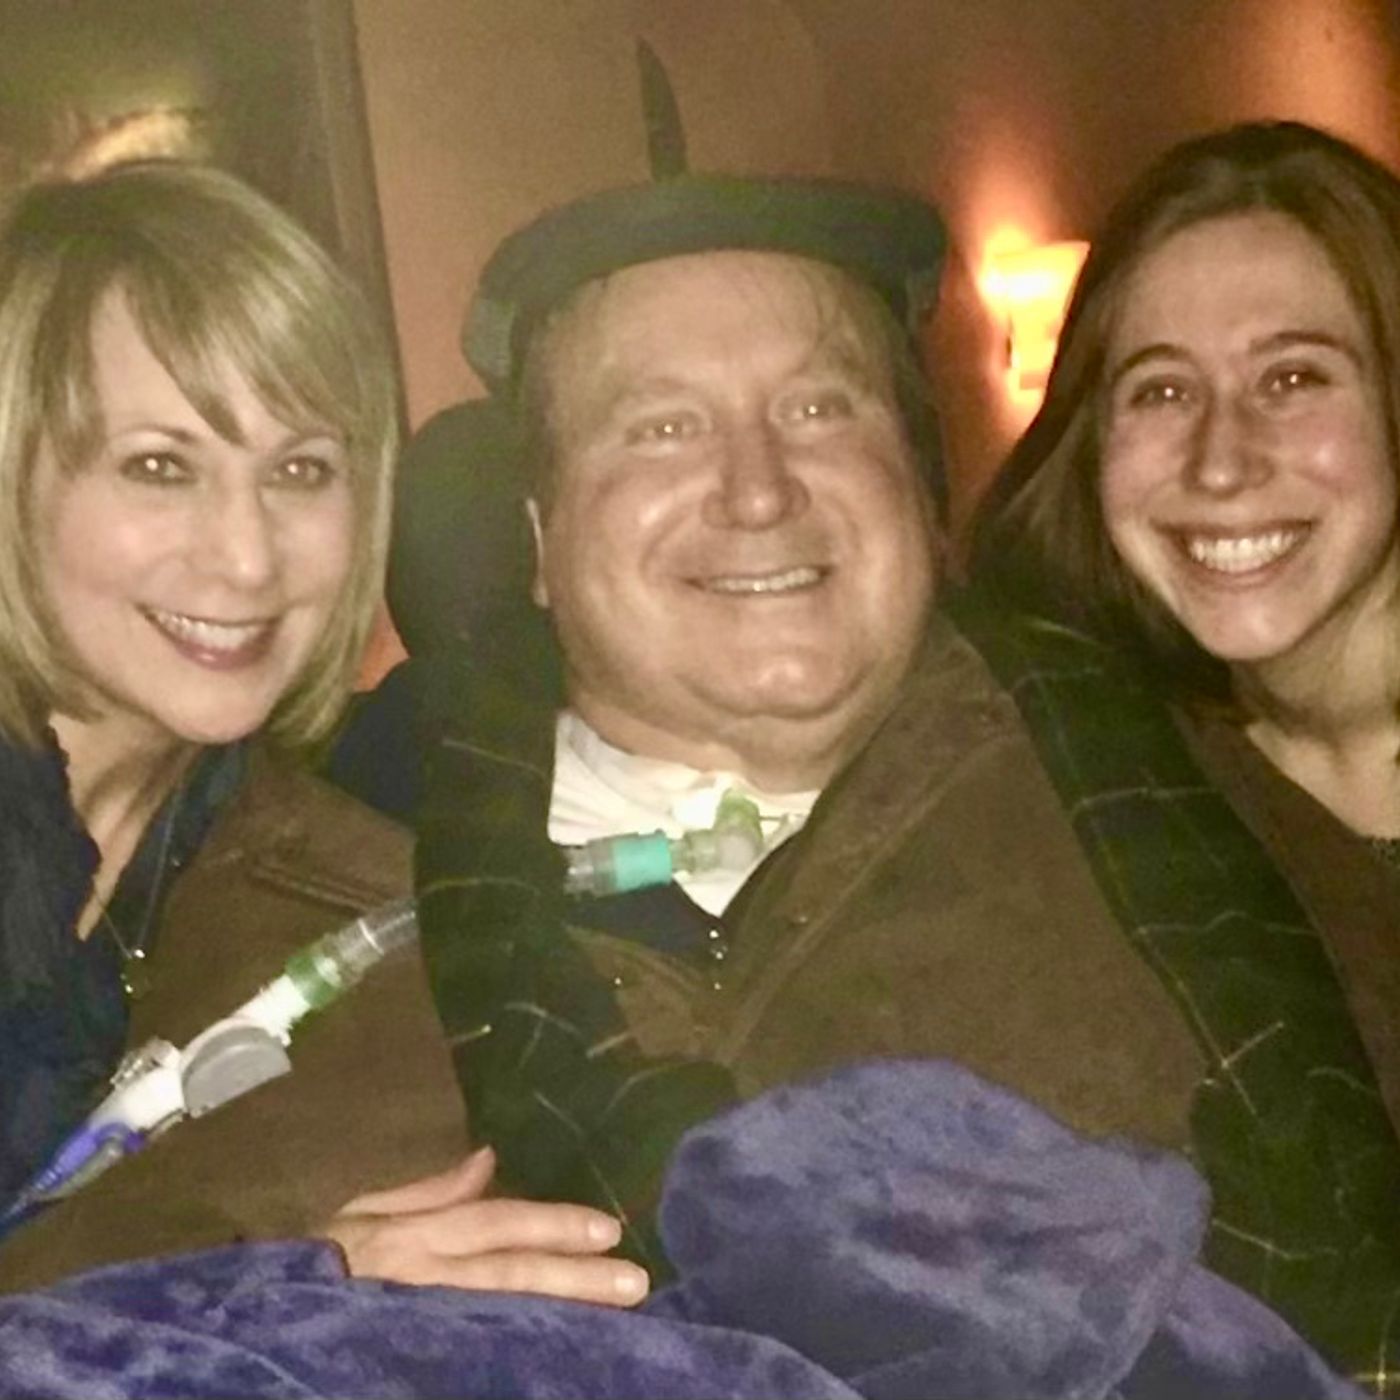 Dad to Dad 215 - Jim Mullen A Disabled Chicago Police Officer, Reflects On Being A Ventilator Dependent Quadriplegic The Past 25 Years